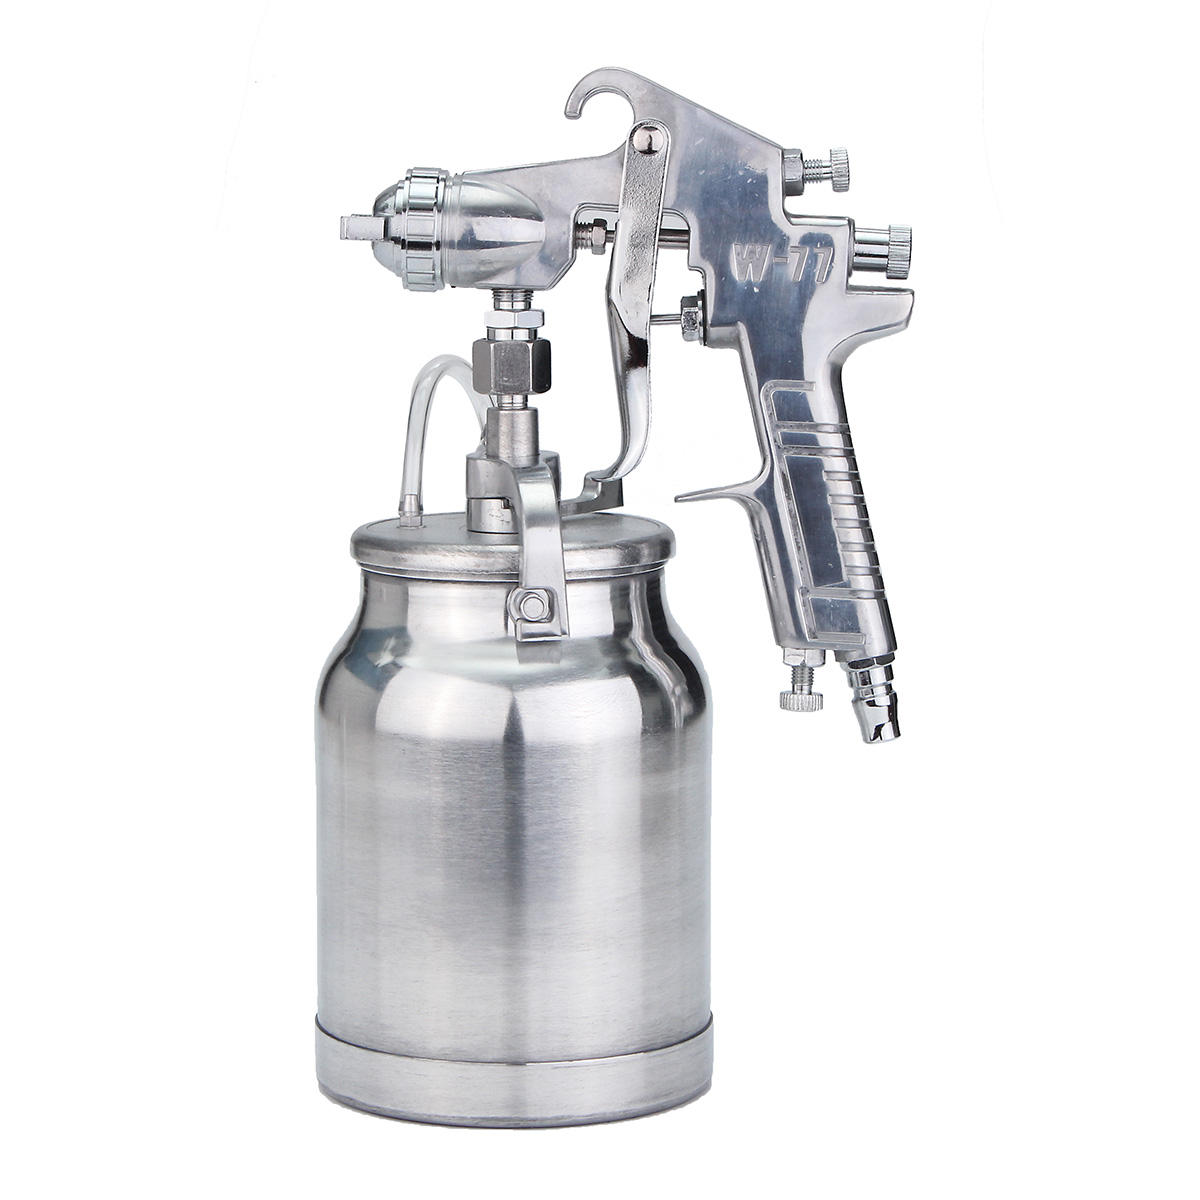 3-In-1-Suction-Feed-Heavy-Duty-Paint-Spray-Sprayer-1L-Pot-14Inch-Air-Hose-Fitting-1264292-2